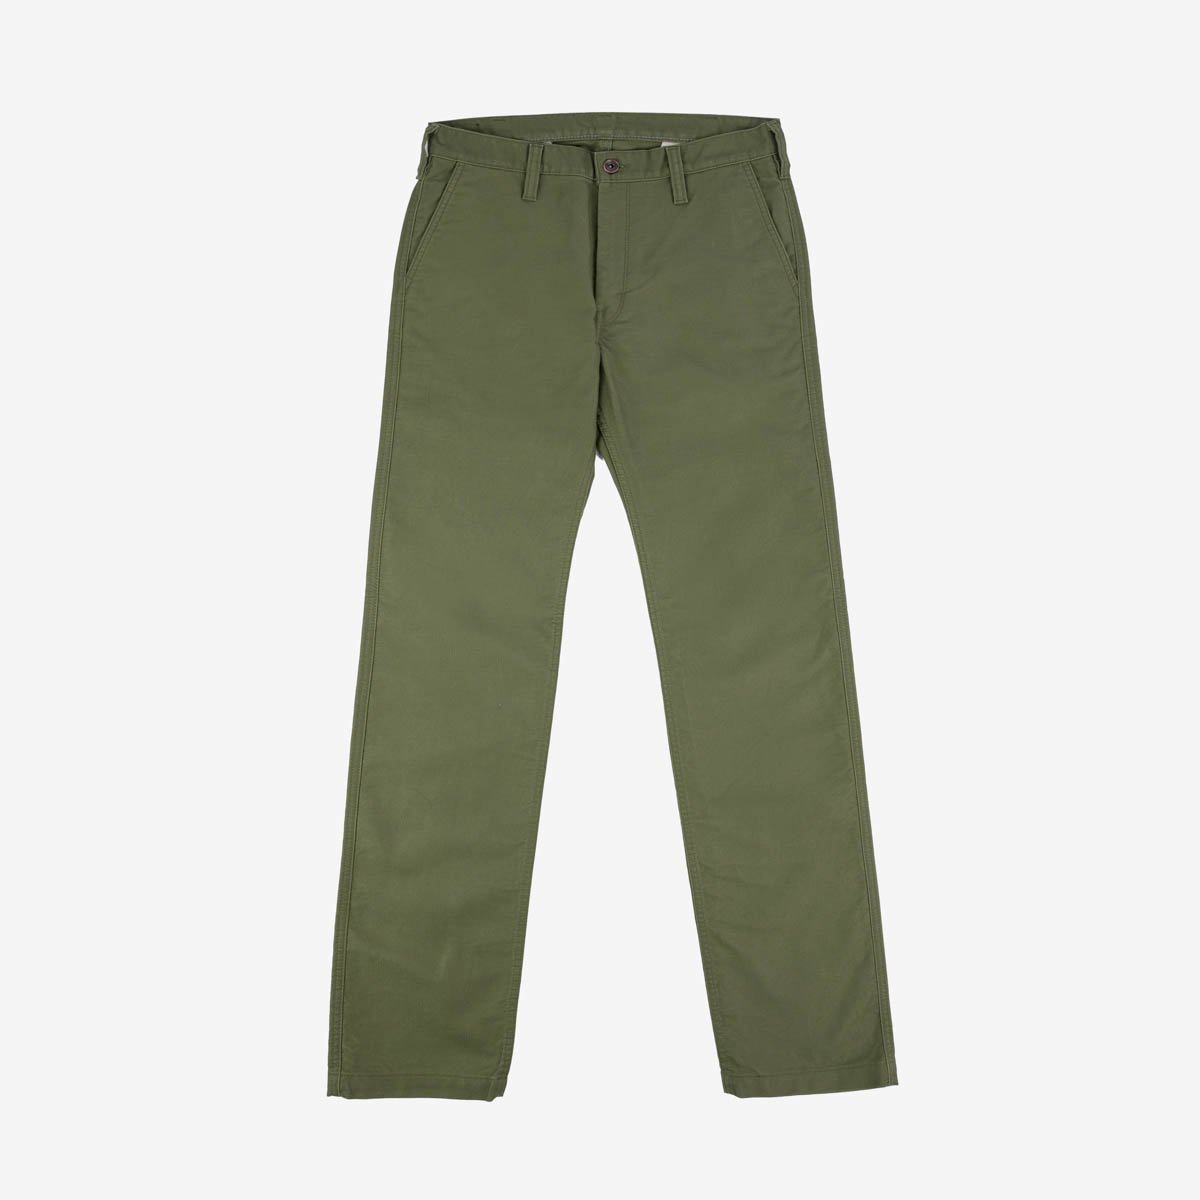 11oz Cotton Whipcord Work Pants - Olive